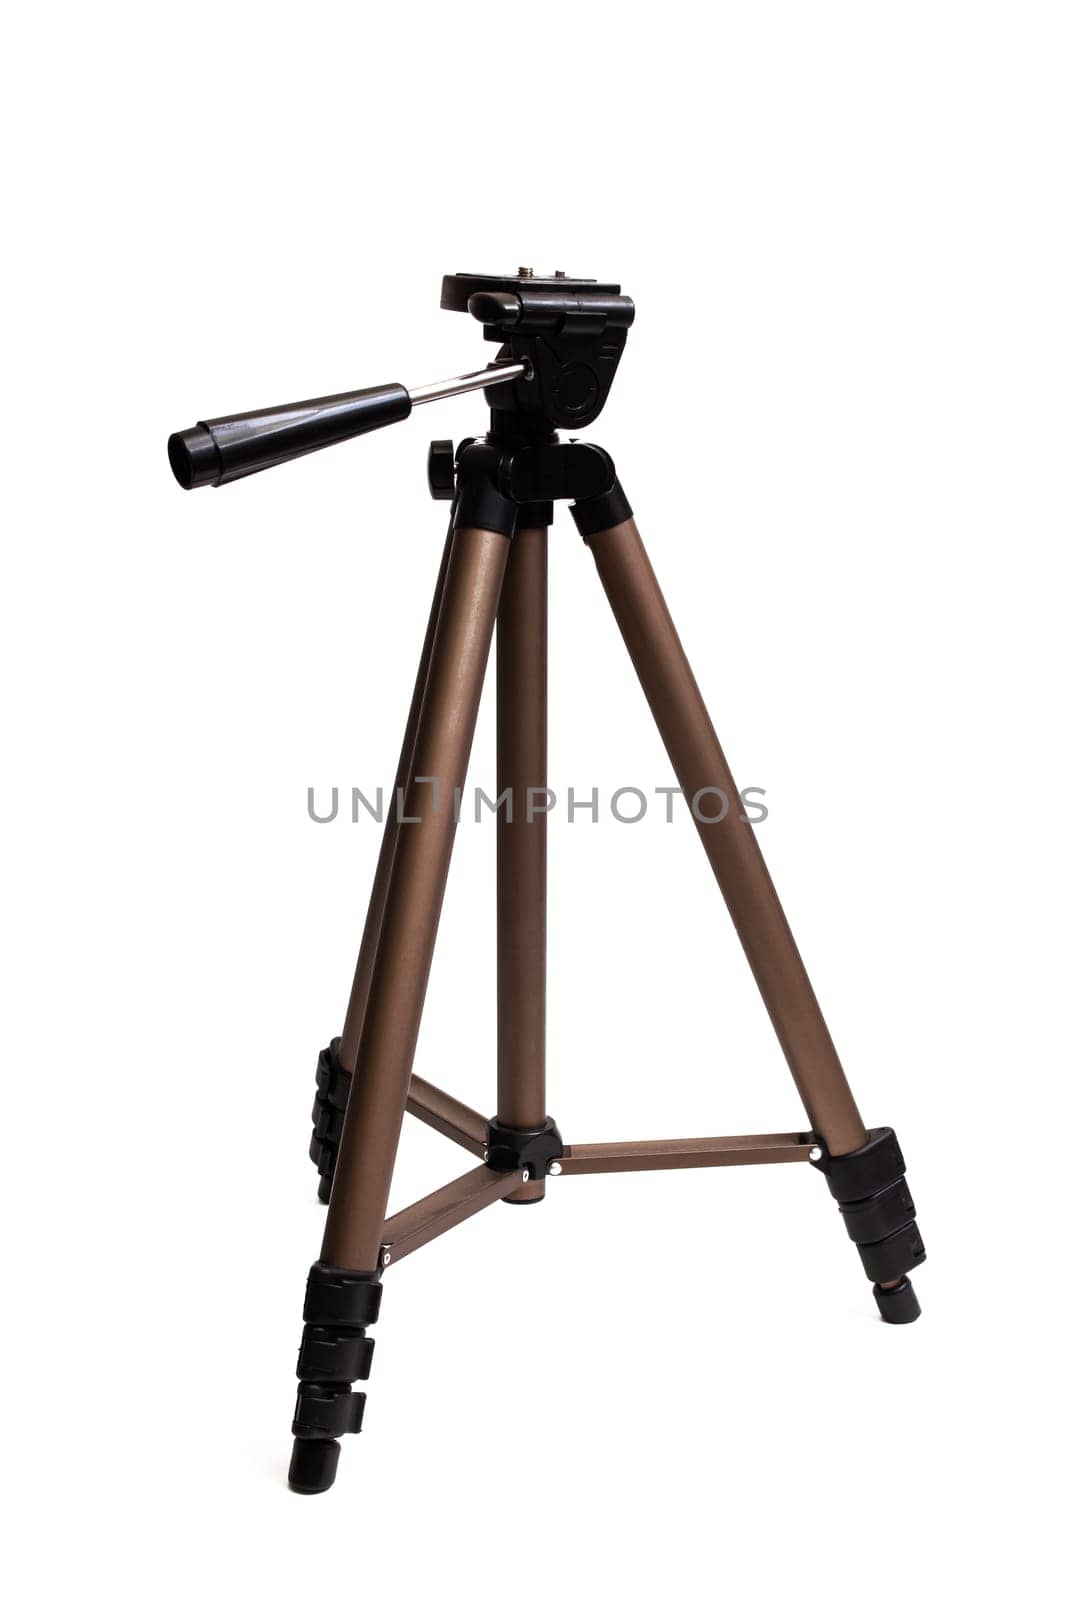 Tripod for the camera isolated on white background by Vera1703